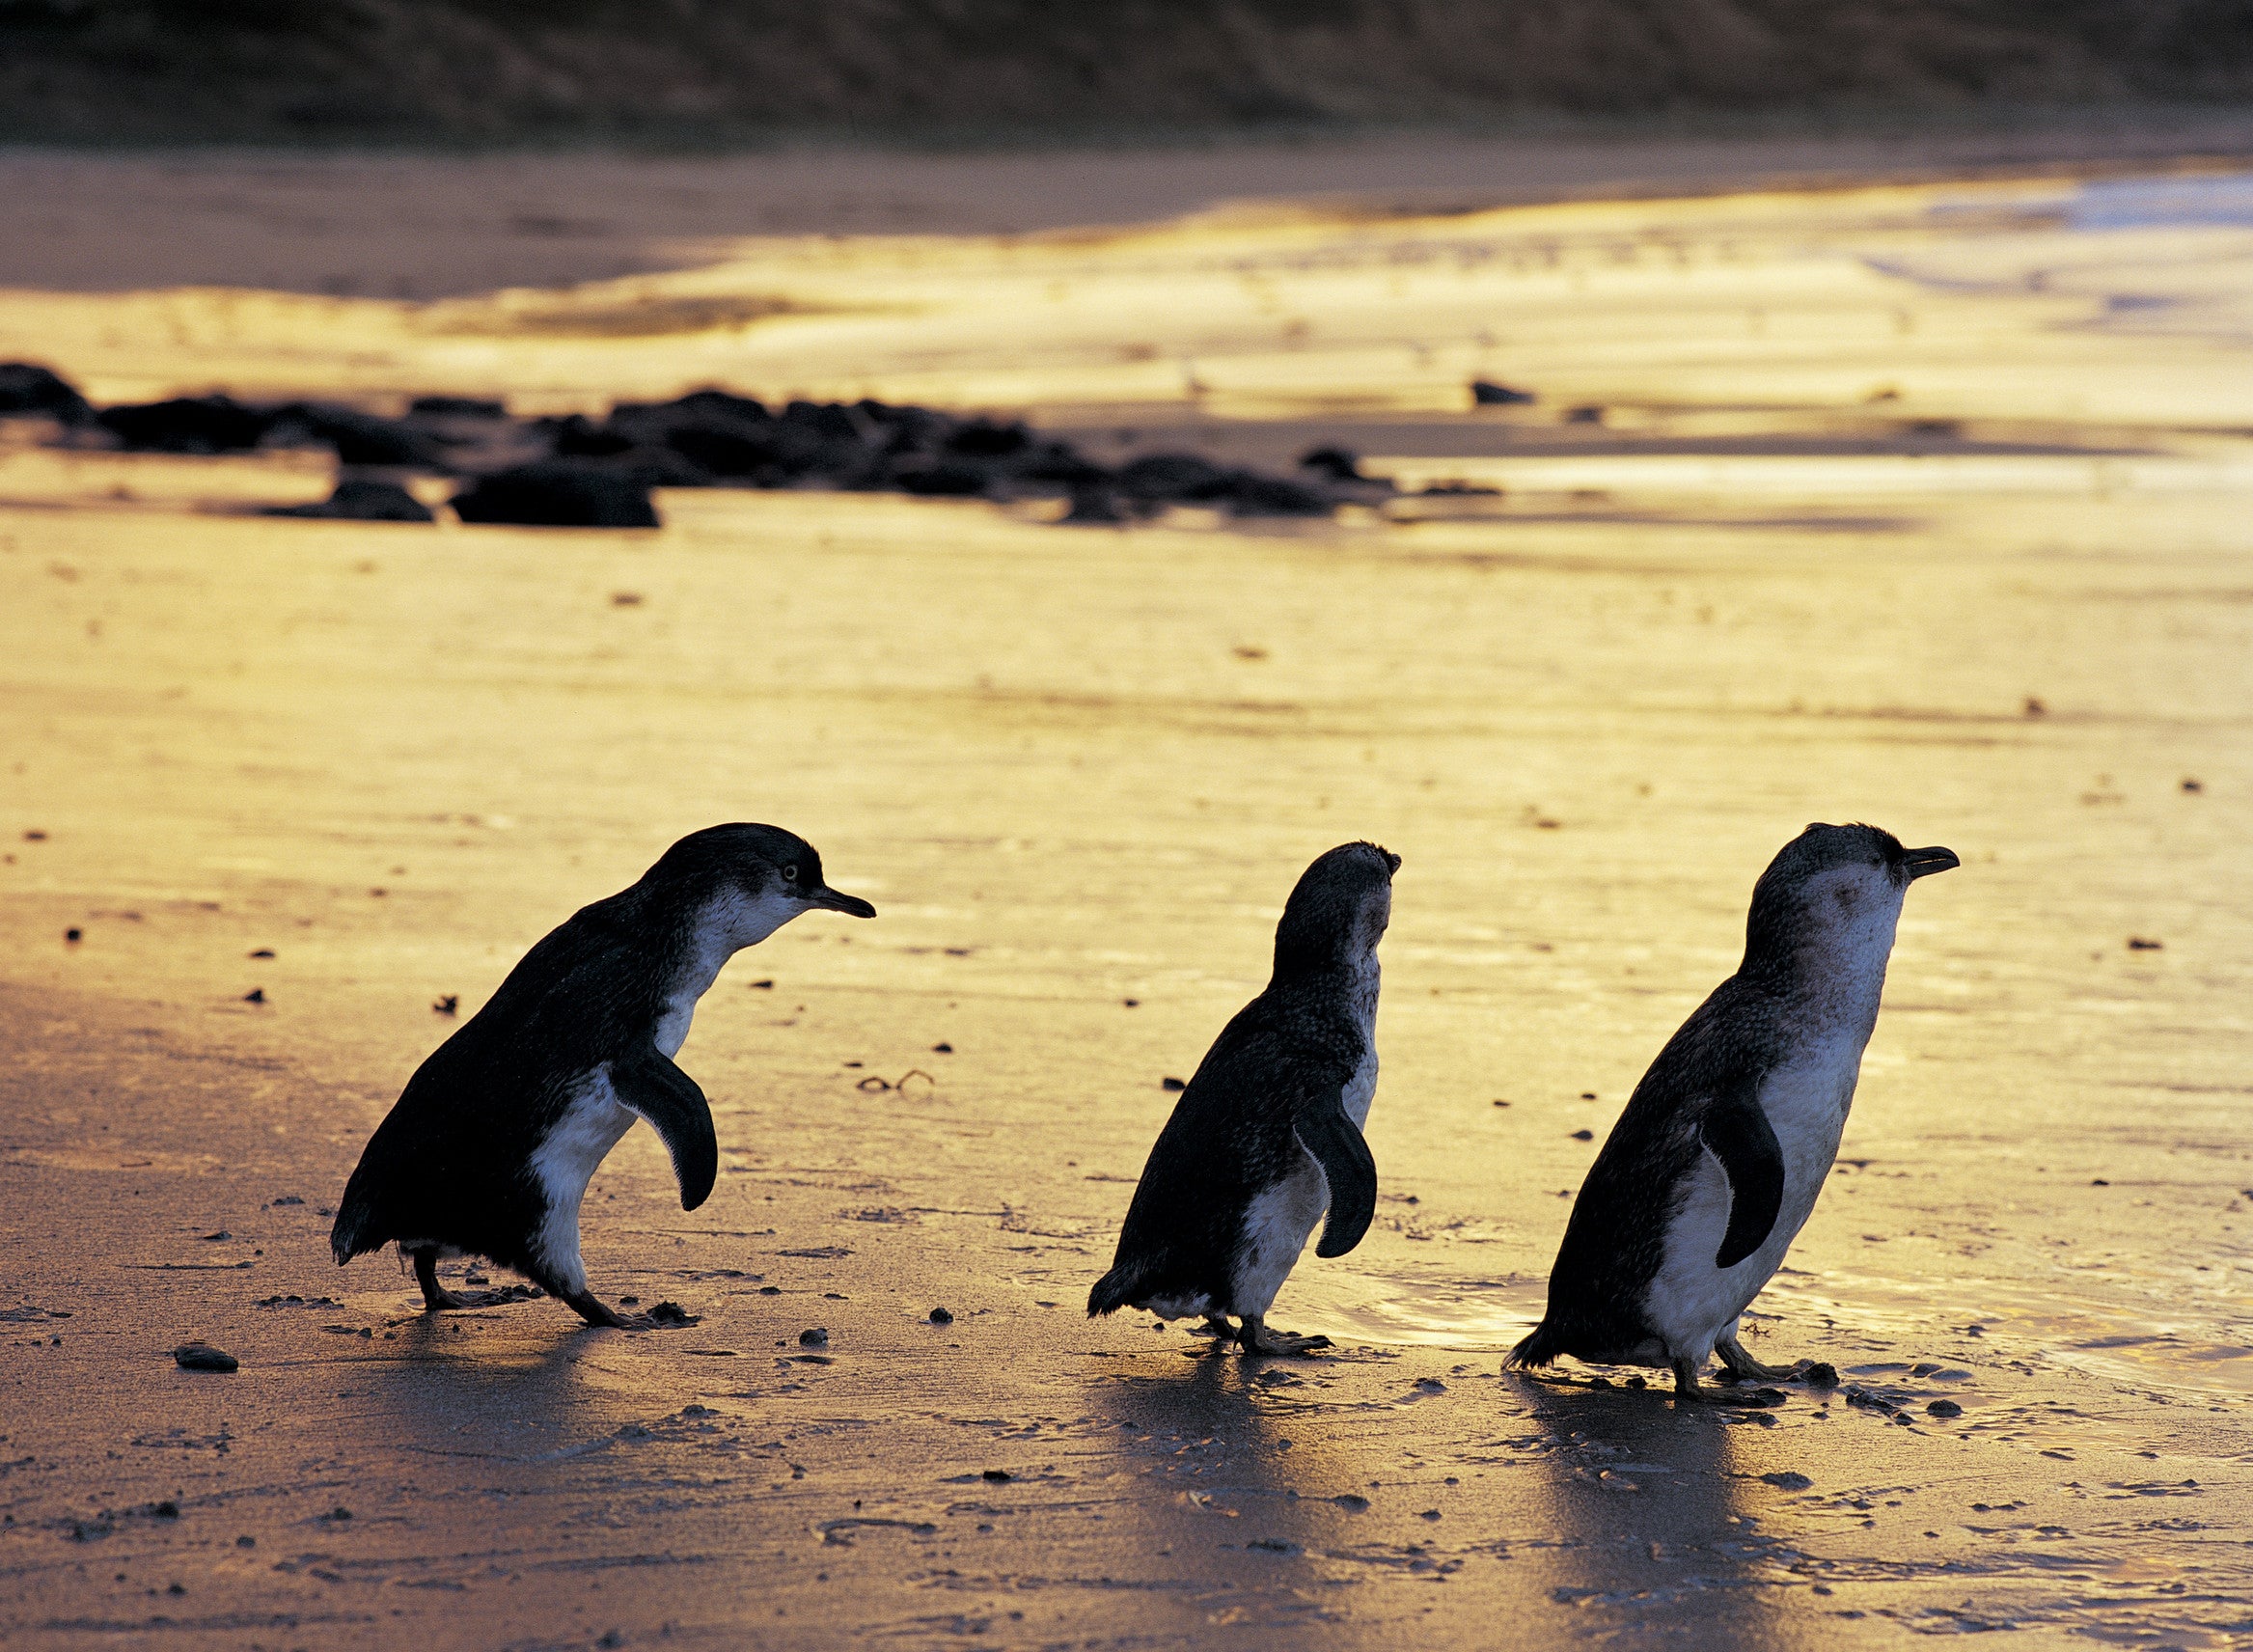 Fairy penguins are the world's smallest species of the bird